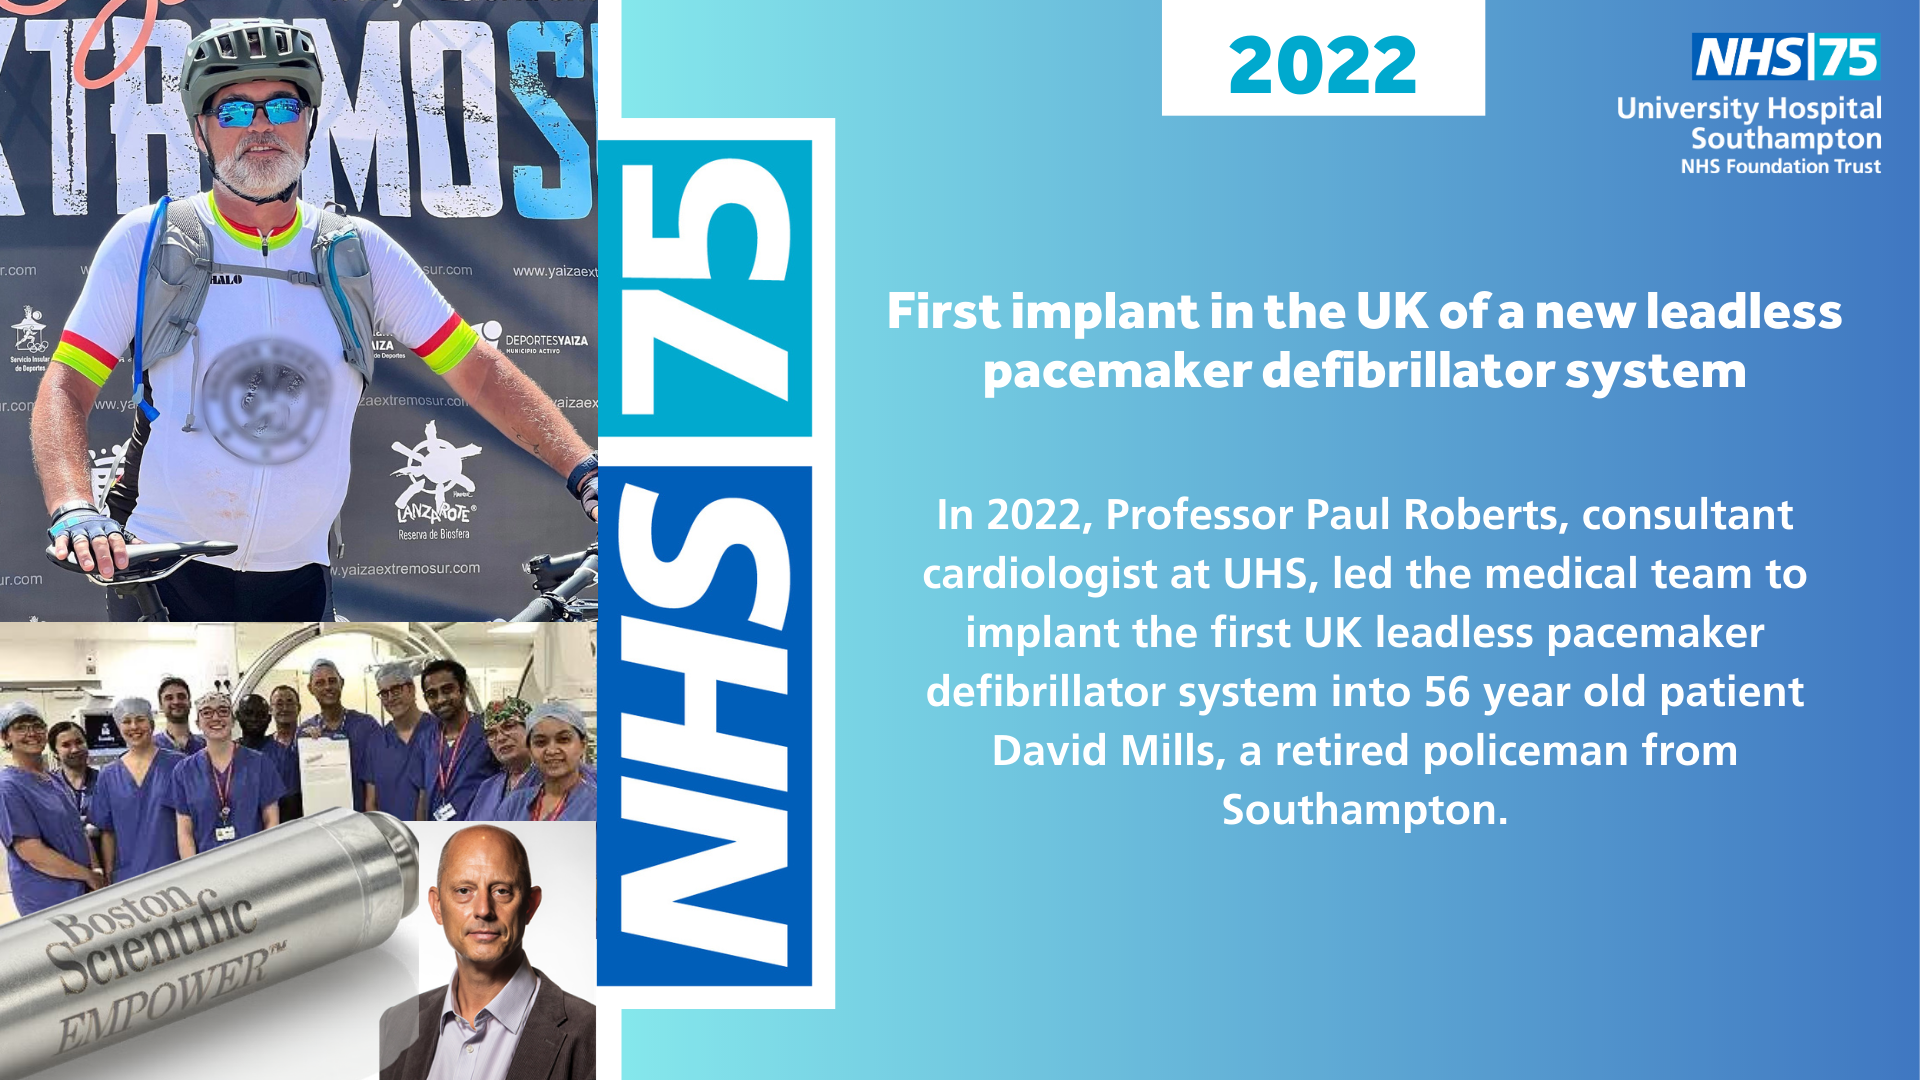 First implant in the UK of a new leadless pacemaker defibrillator system